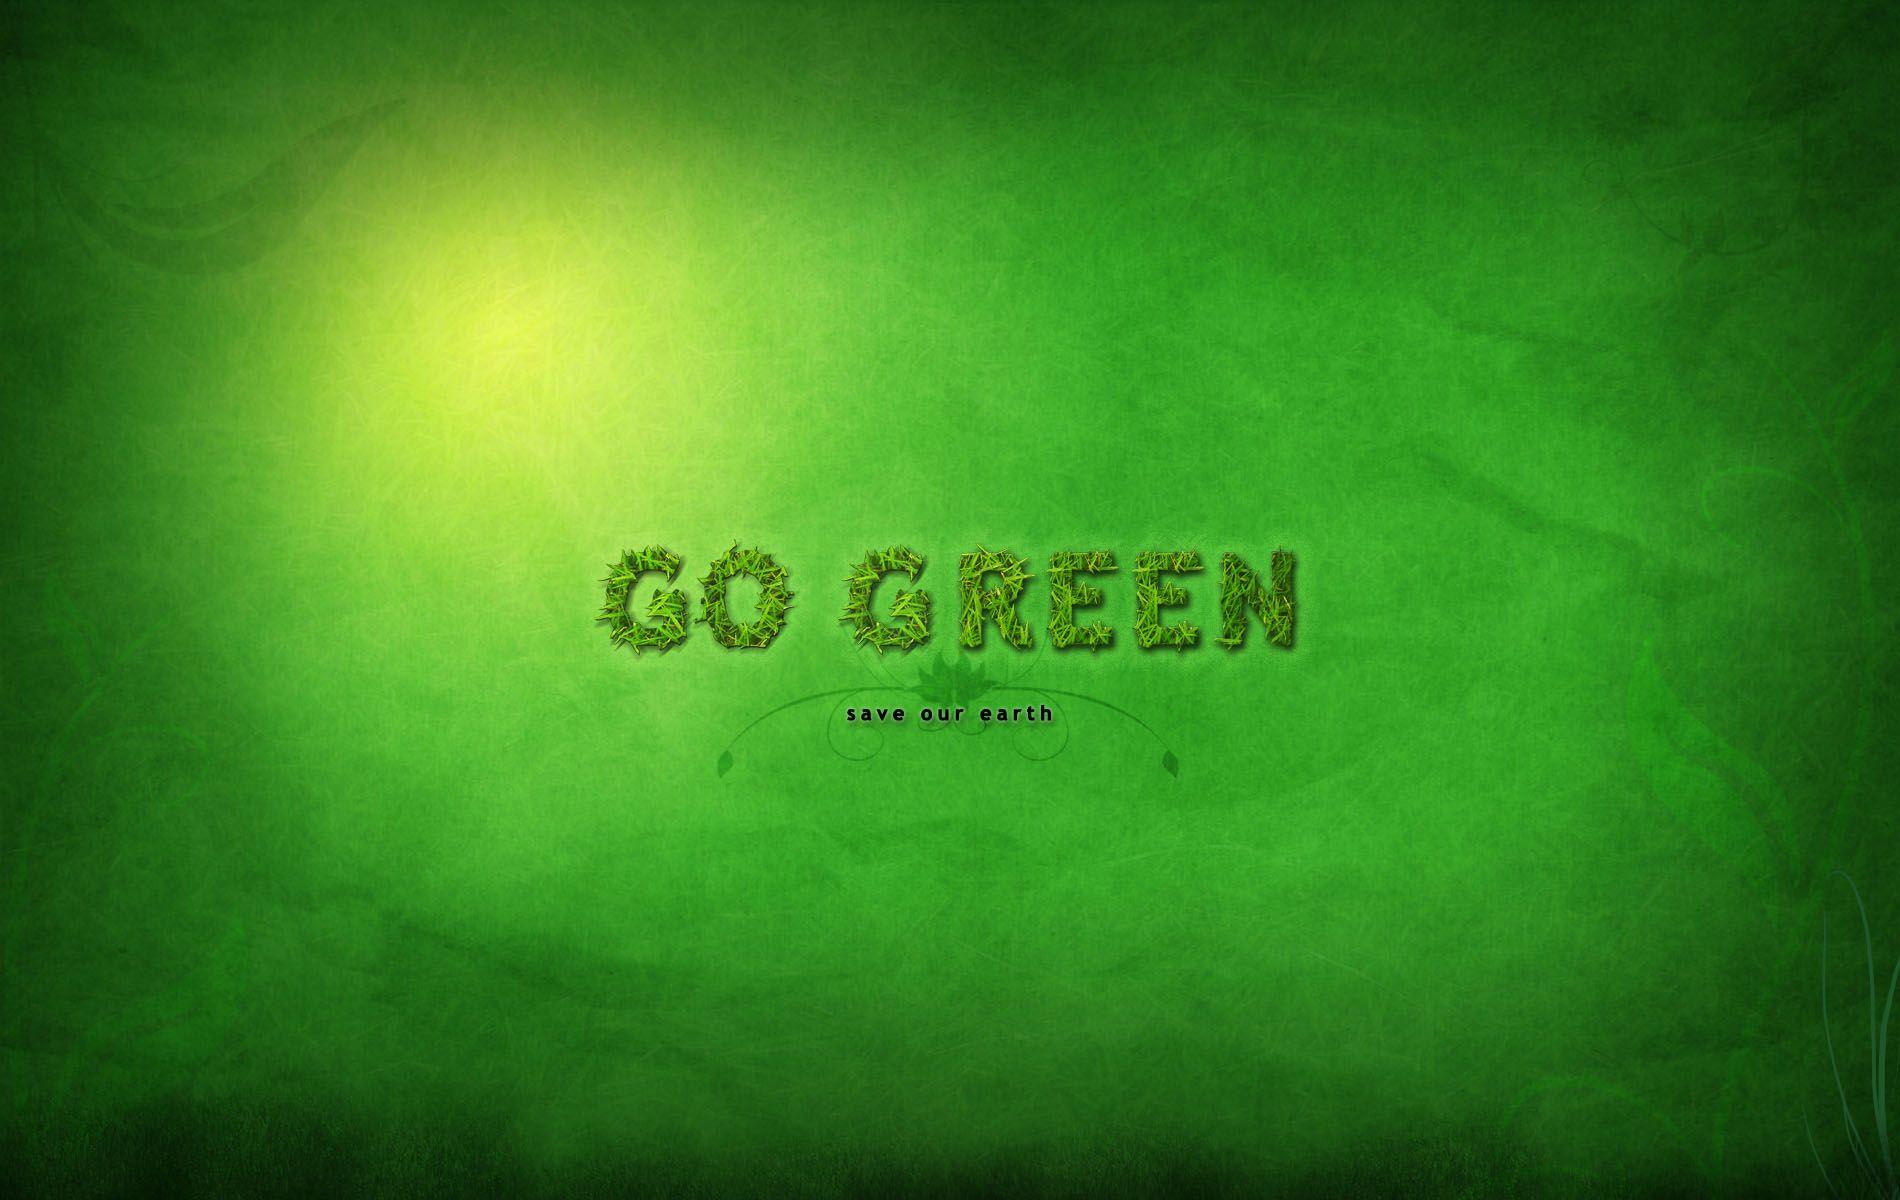 Wallpaper.wiki Go Green Earth Day Wallpaper Background PIC